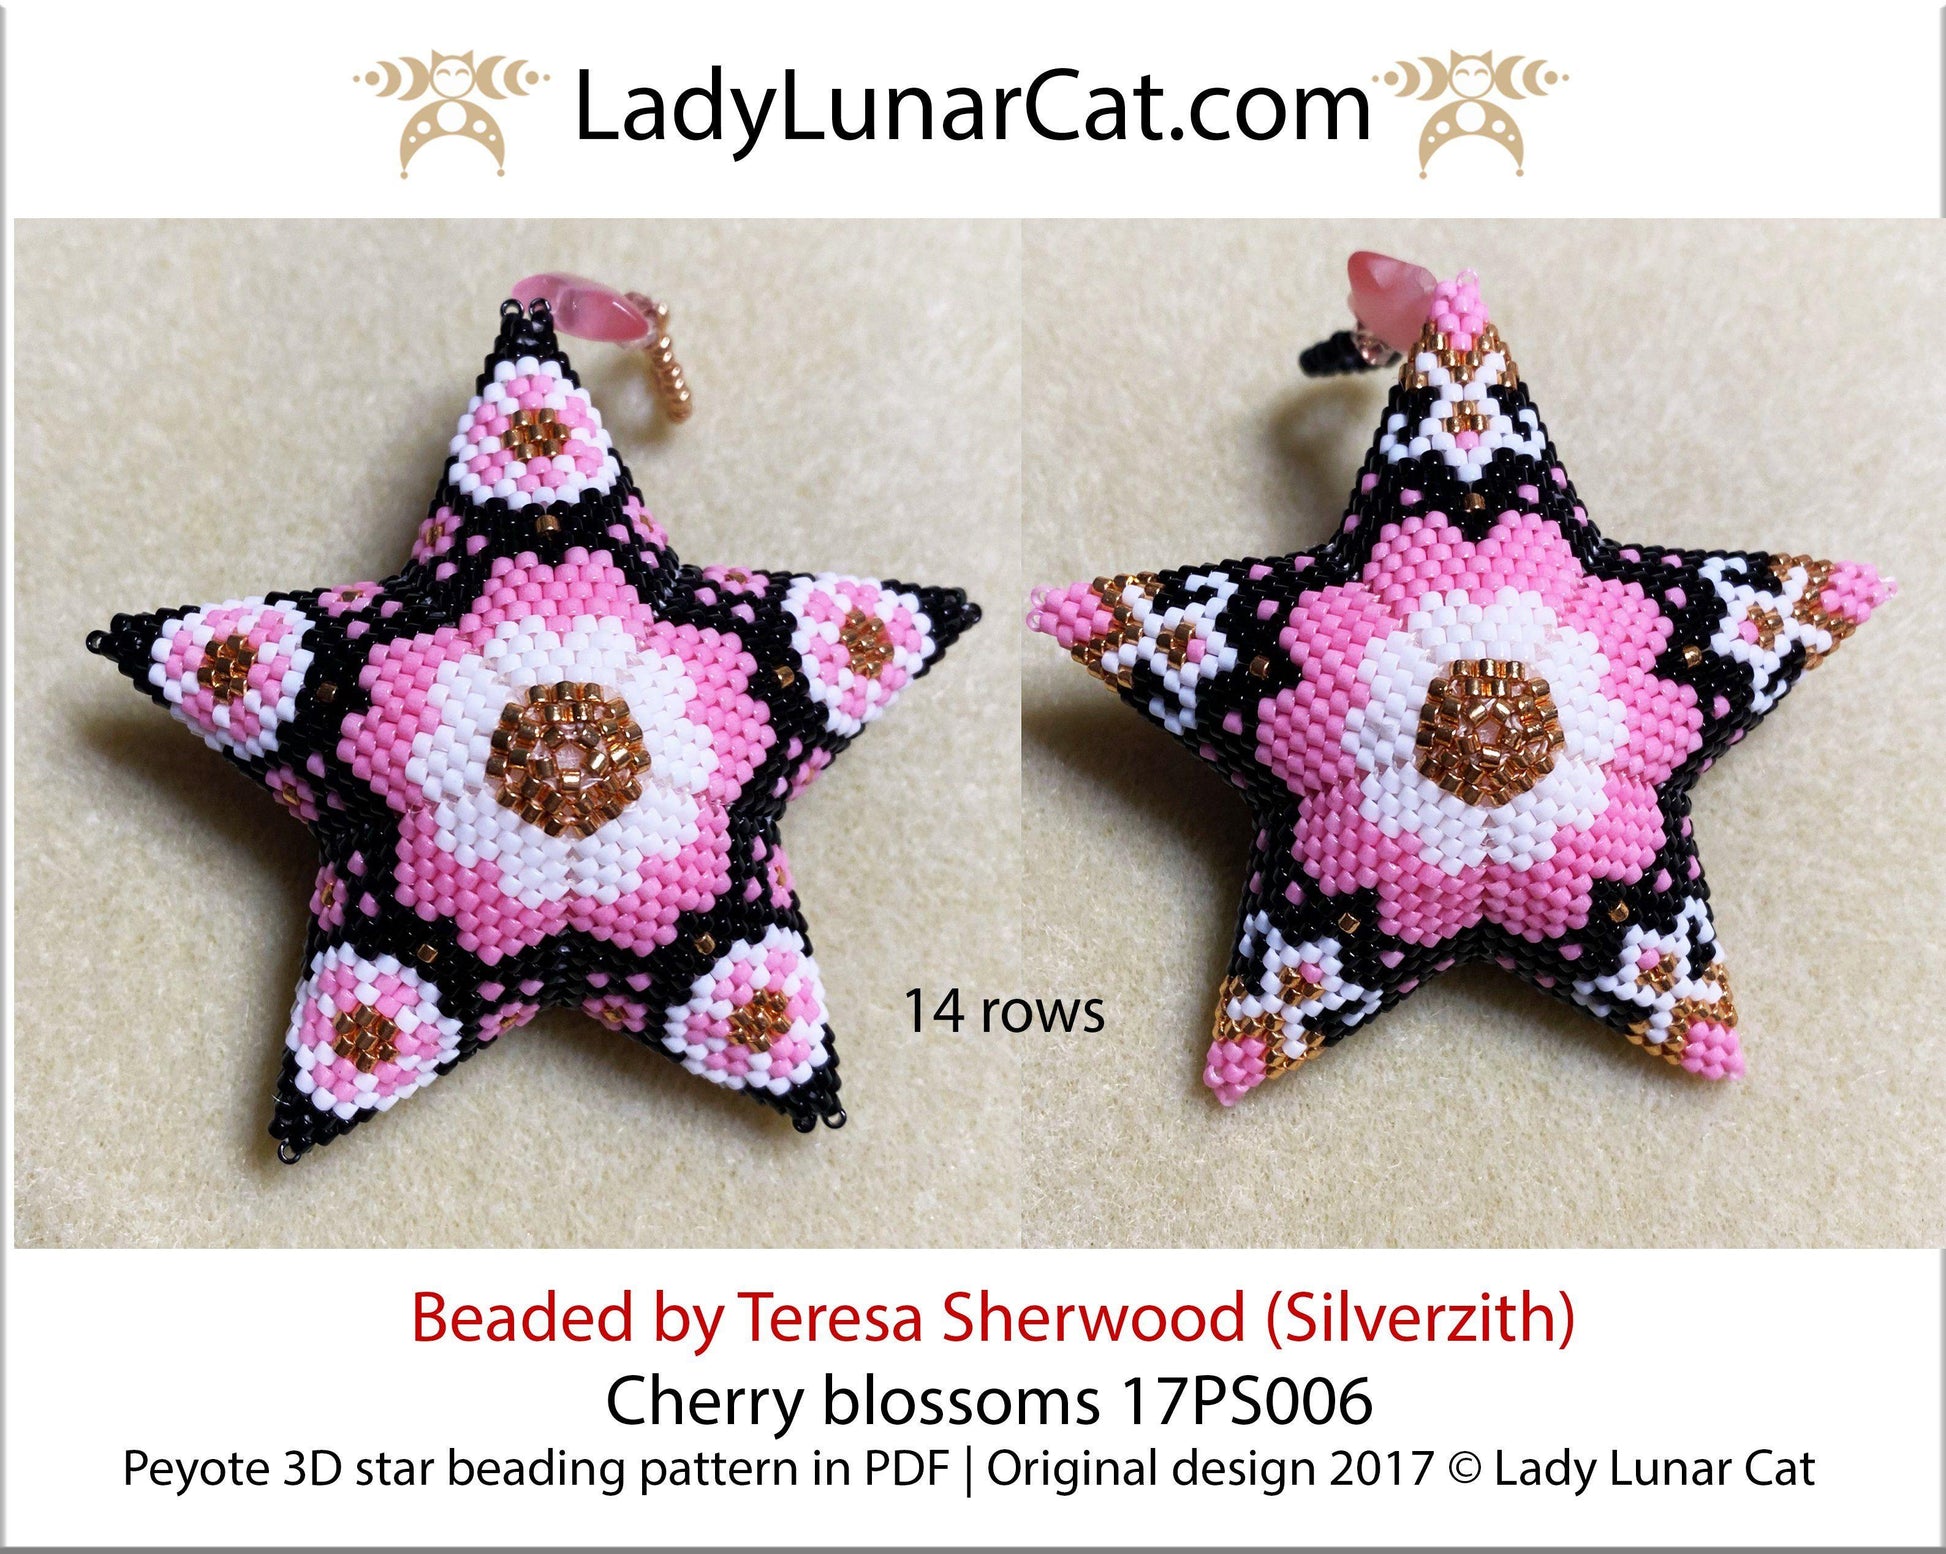 3d peyote star patterns for beading Cherry blossoms 17PS006 LadyLunarCat